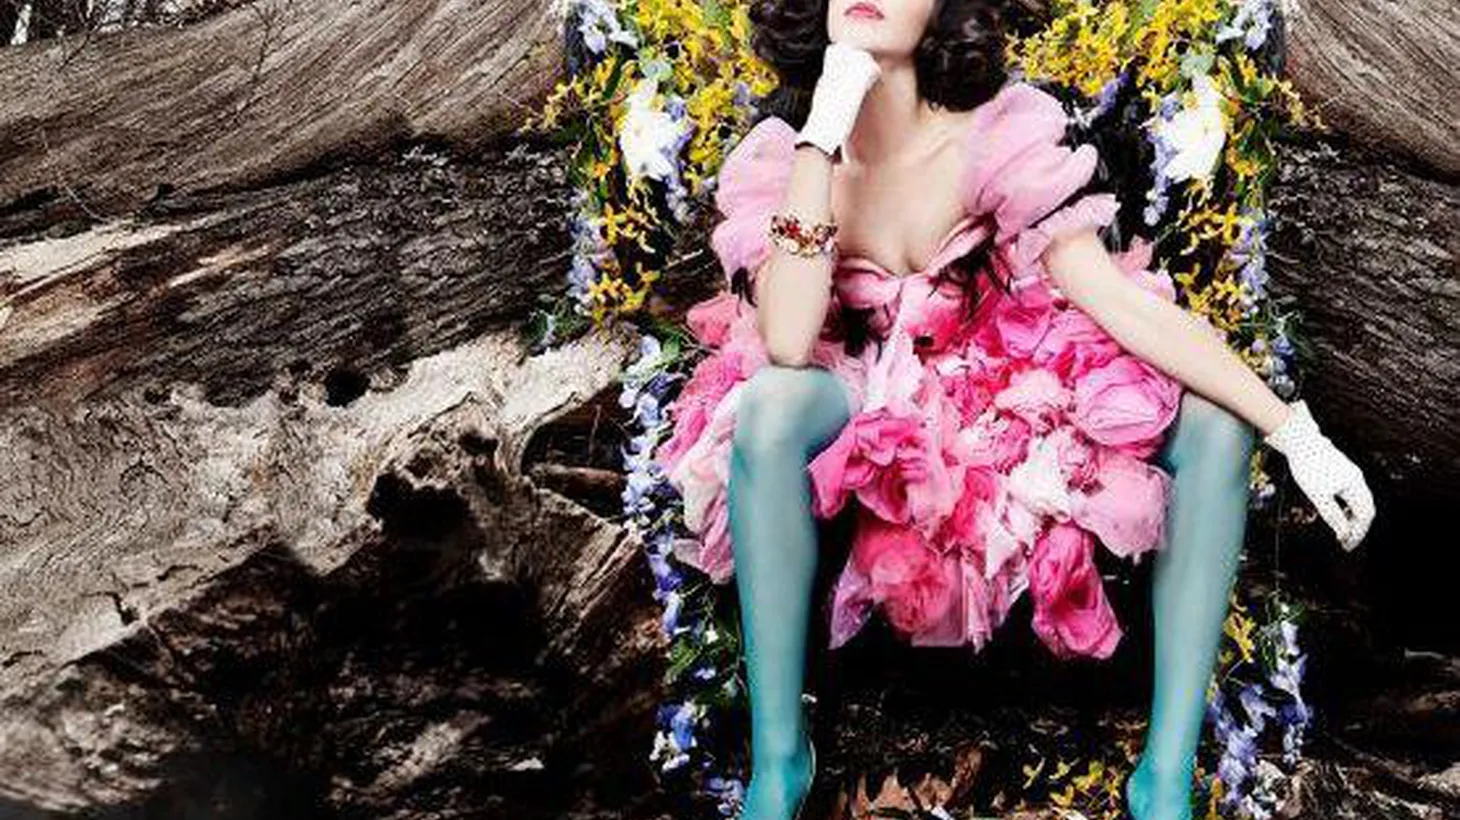 We fell in love with New Zealand singer Kimbra when she joined Gotye on Morning Becomes Eclectic last year...